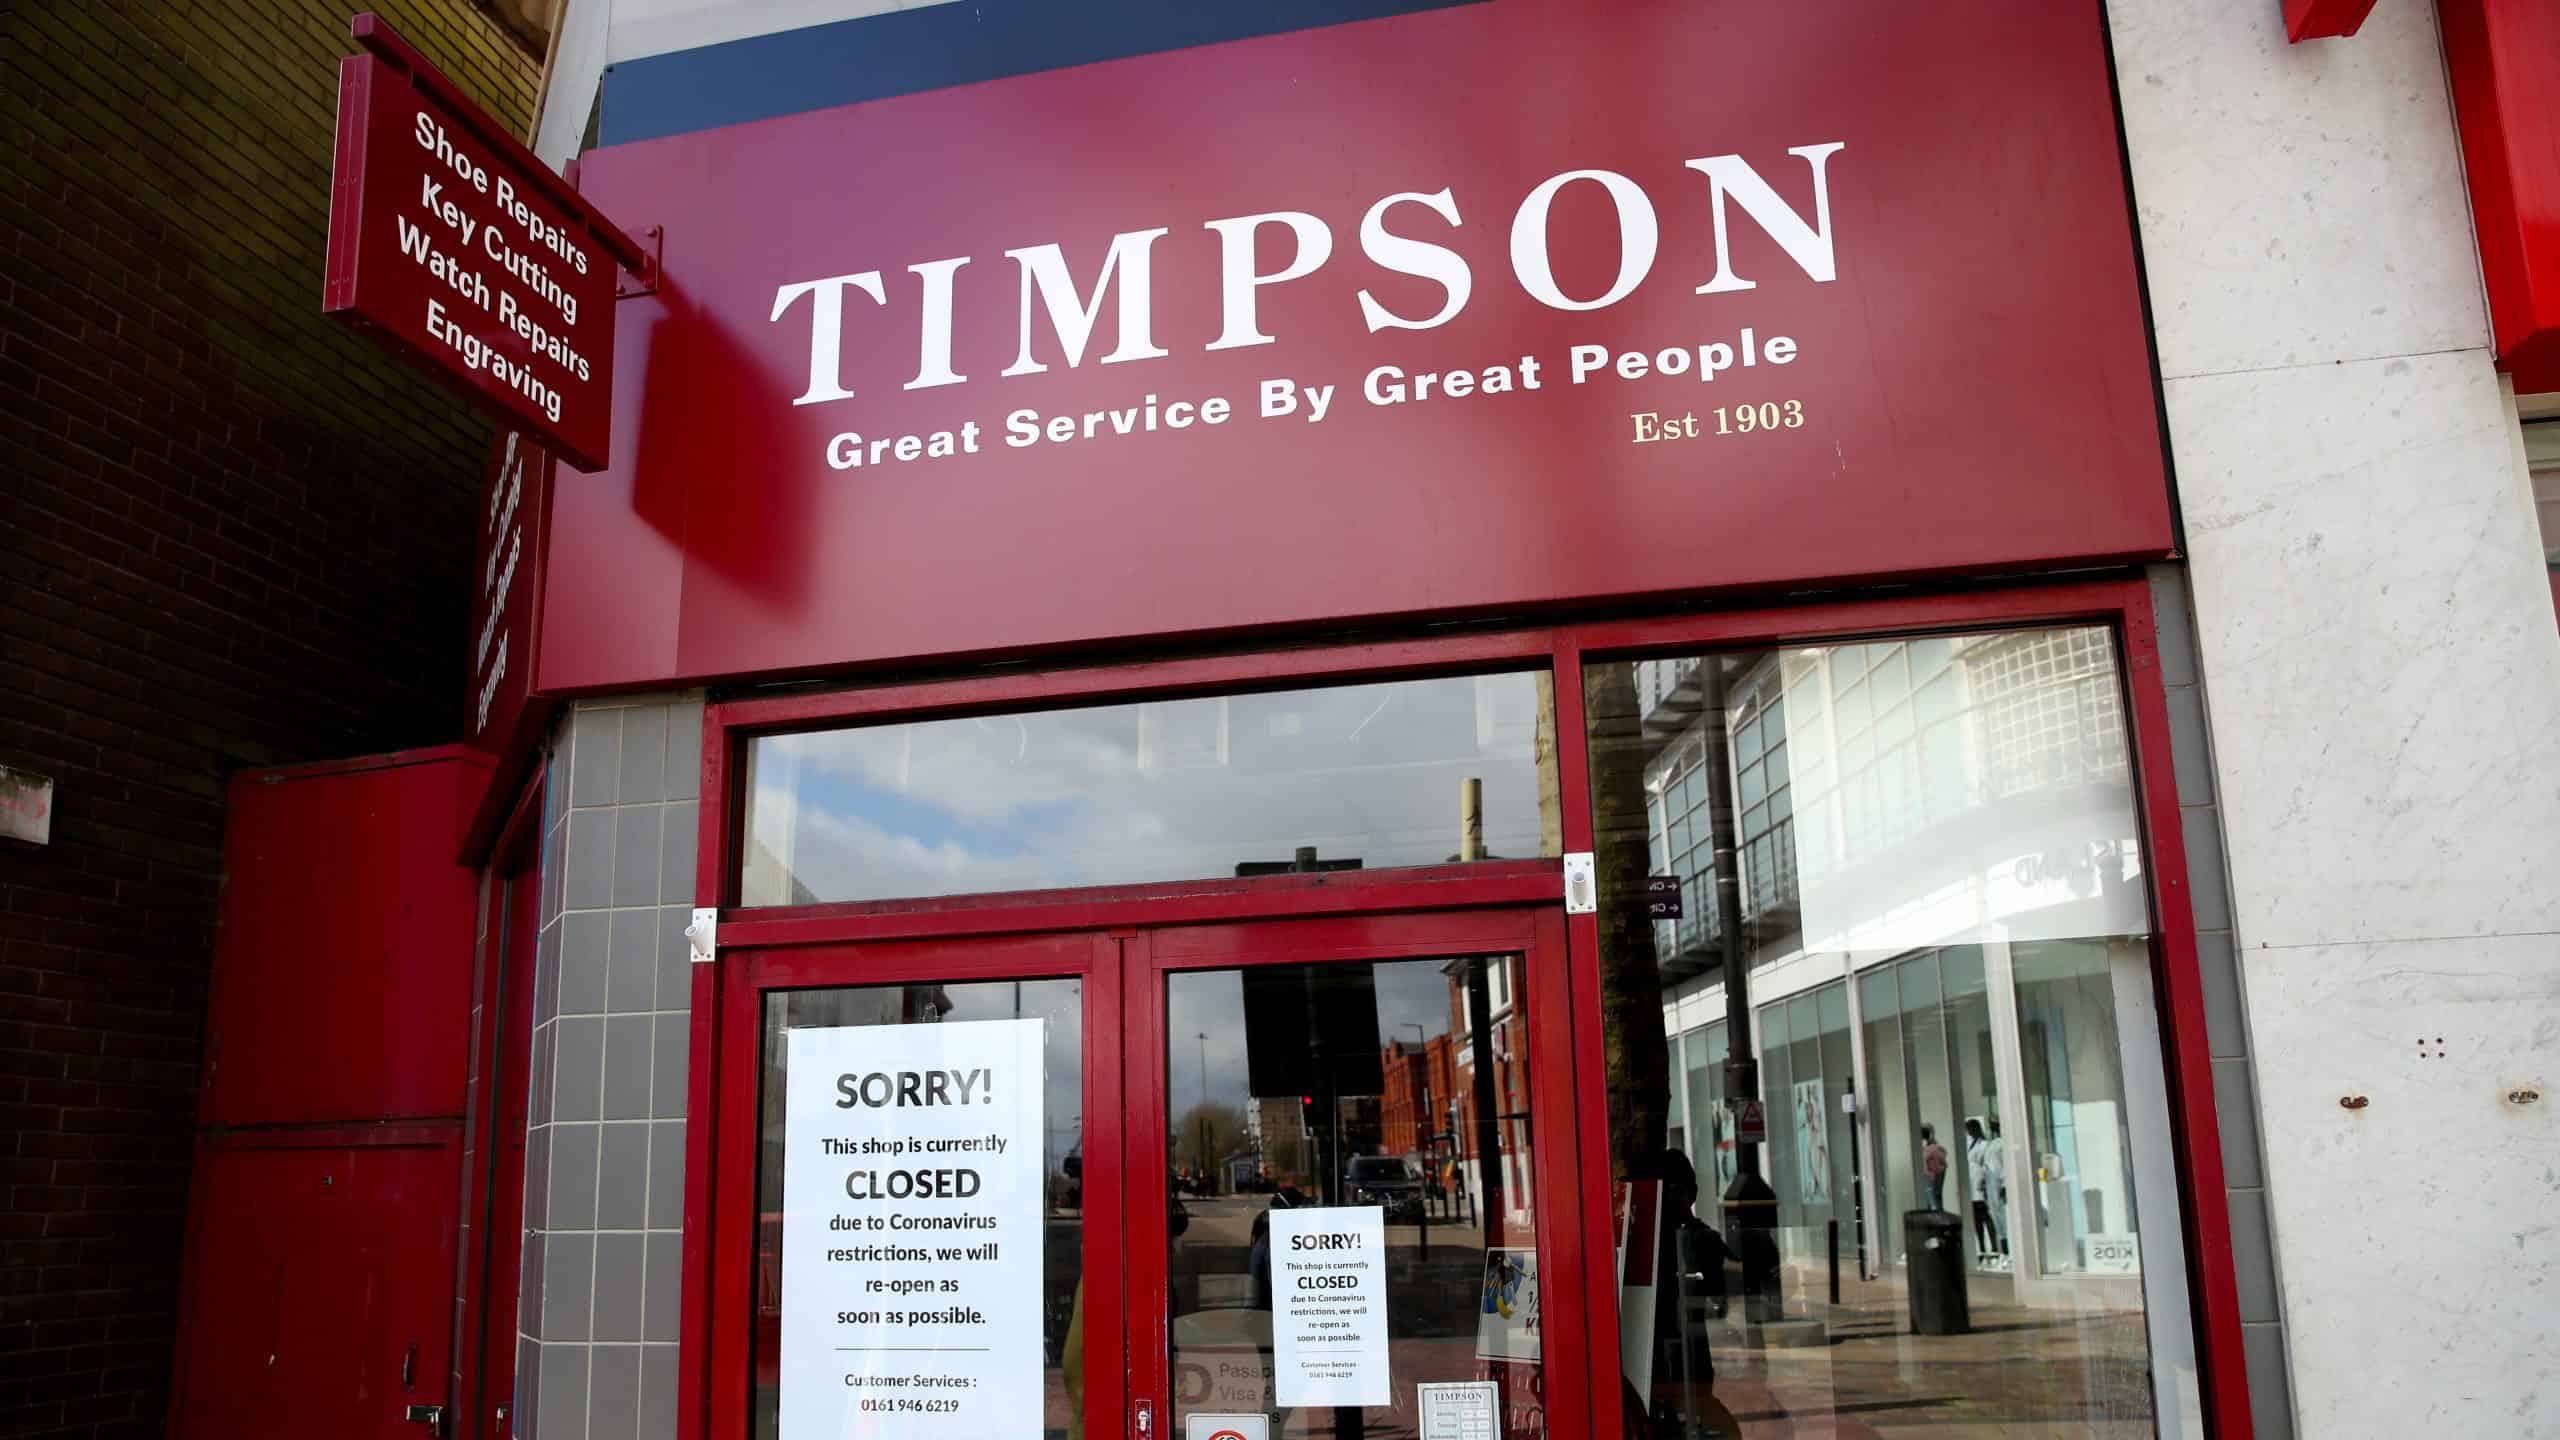 Timpson proves once again why it’s a business of impeccable moral standing